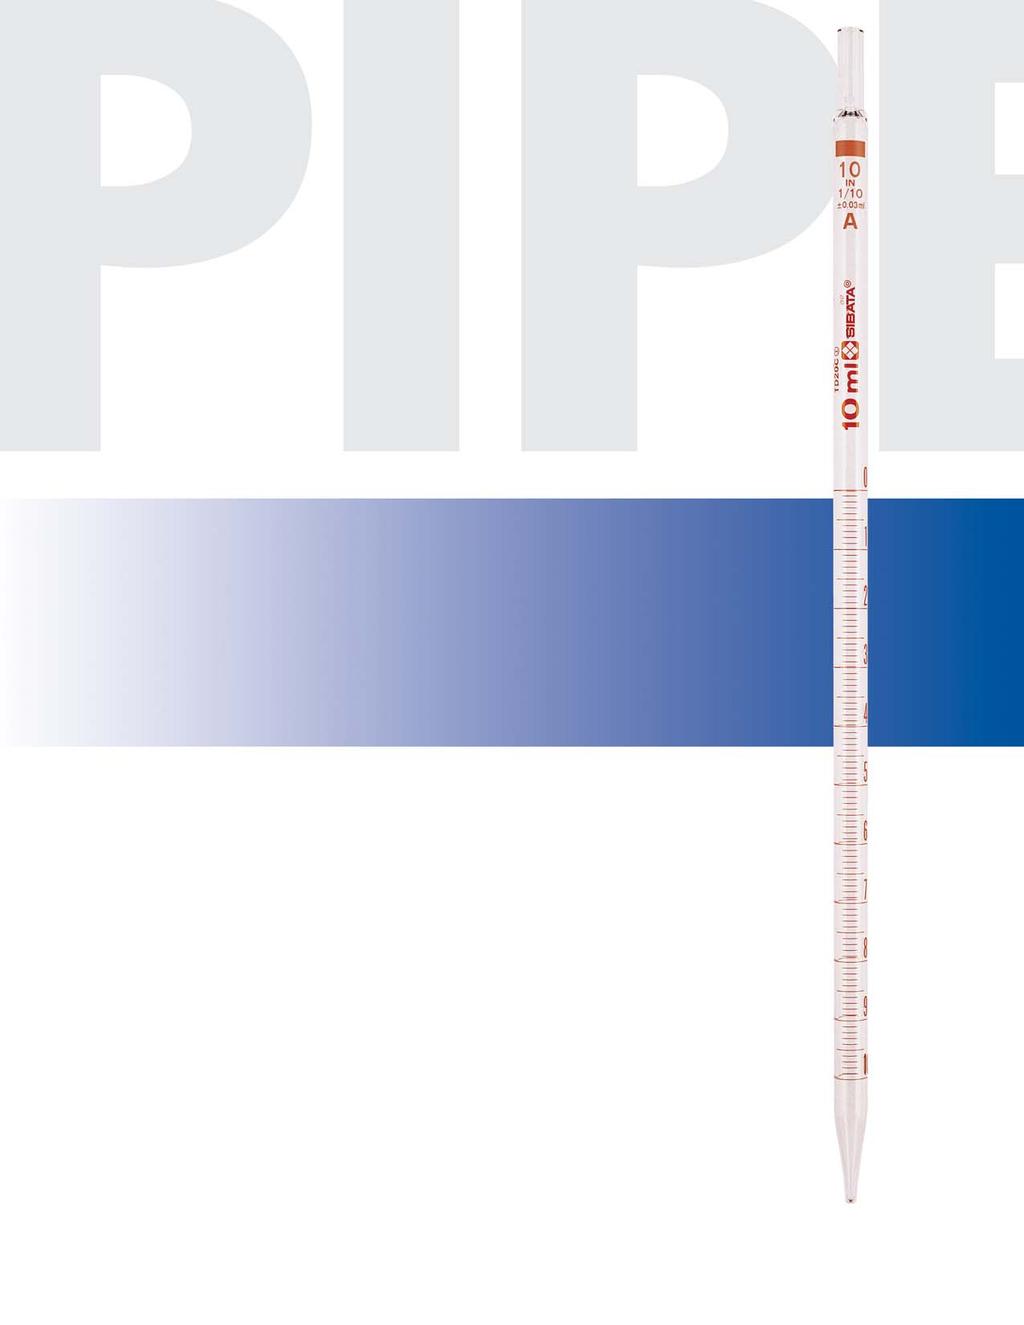 Measuring Pipets Class A, Reusable Glass, Color-Coded, w/ Colored Markings, To Deliver SIBATA 0A-Series Measuring Pipets meet ASTM E-93 Style, Class A & USP Standards for Volumetric Glassware.